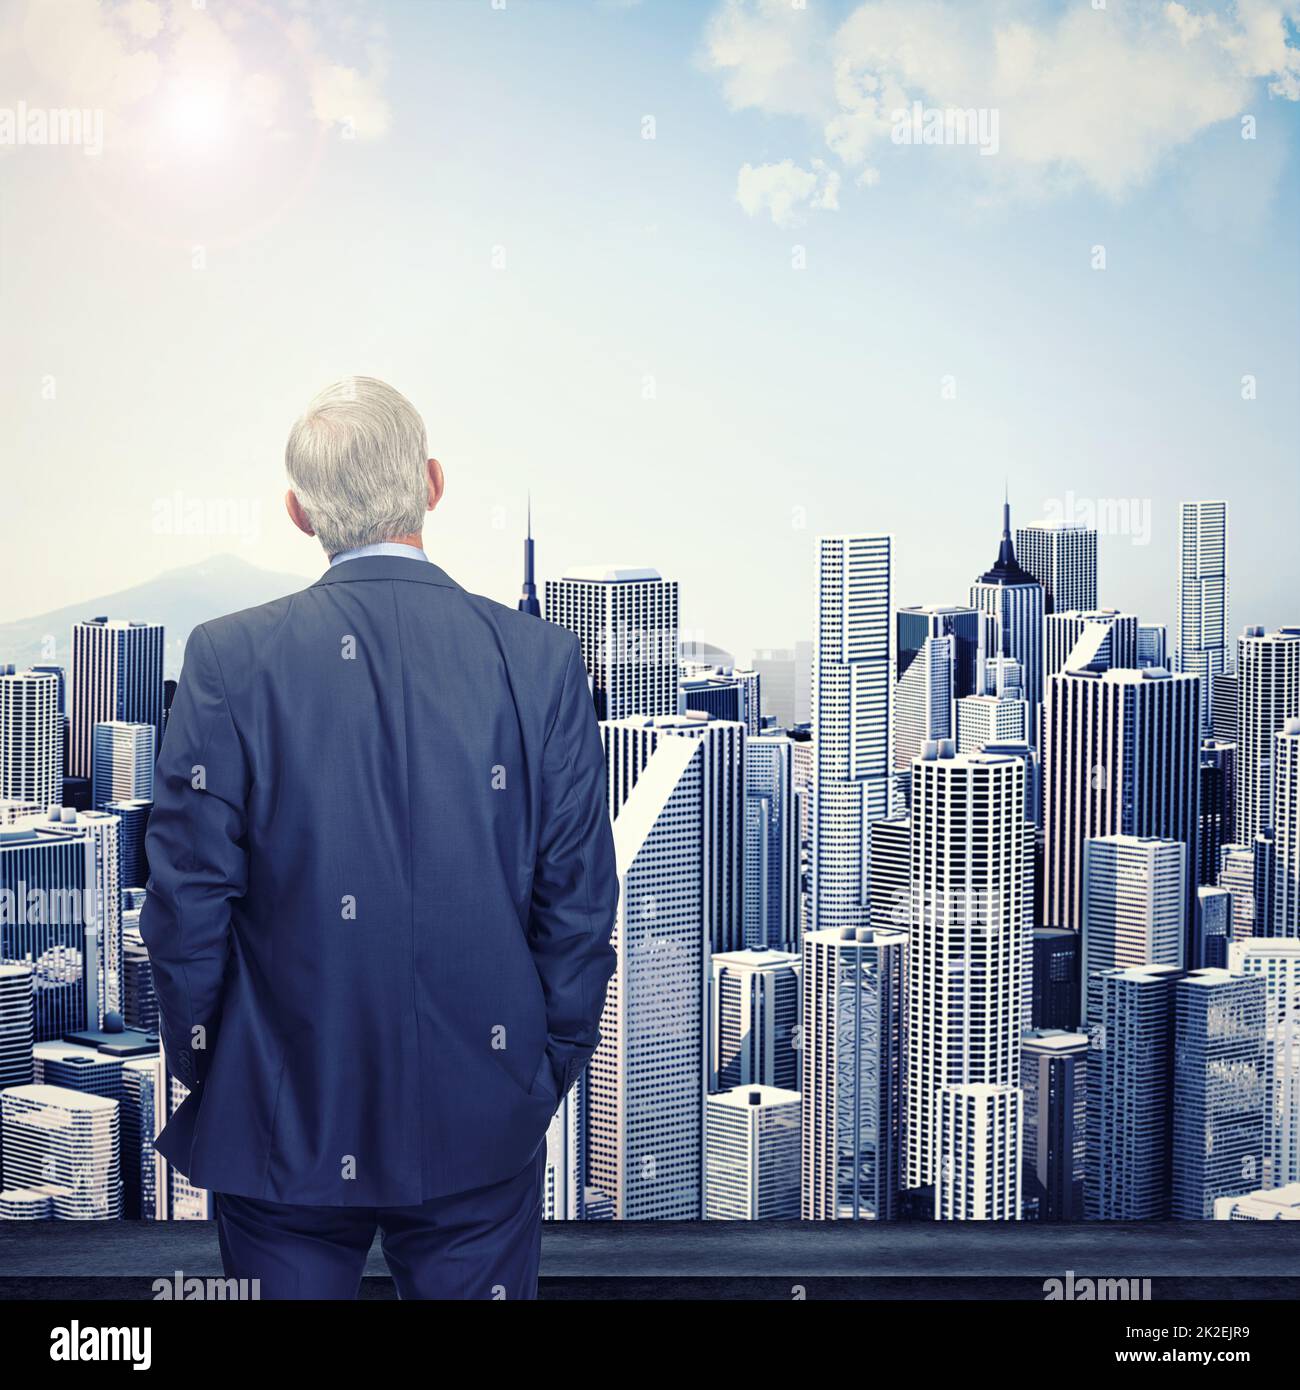 Ive reached the top. Rearview shot of a businessman surveying a city skyline. Stock Photo